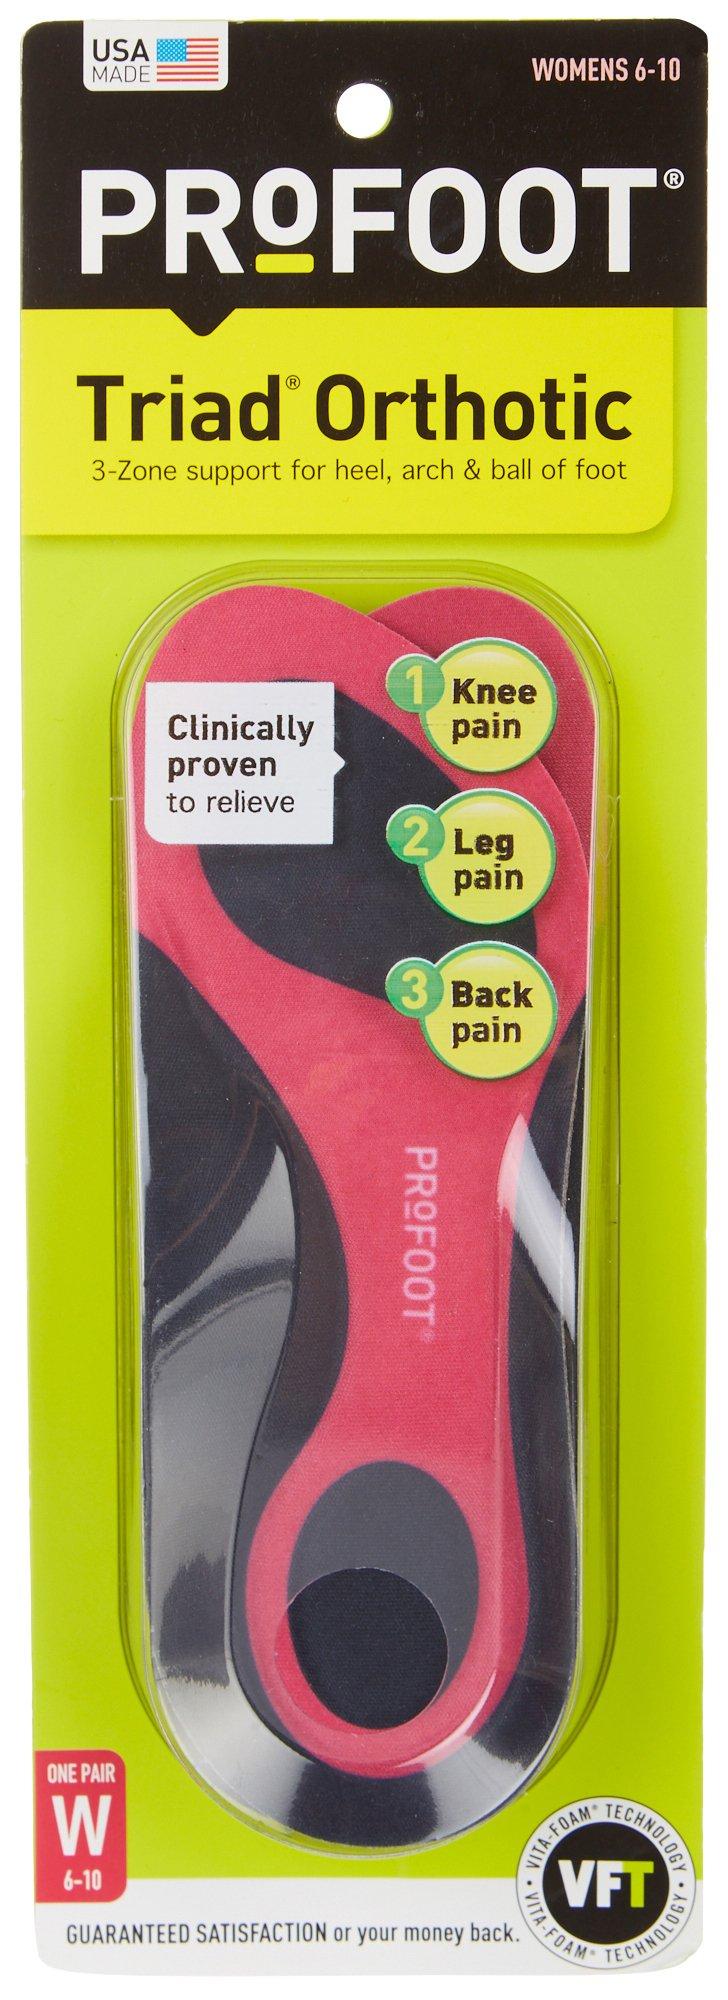 ProFoot Womens Triad Orthotic Pain Relief Insole